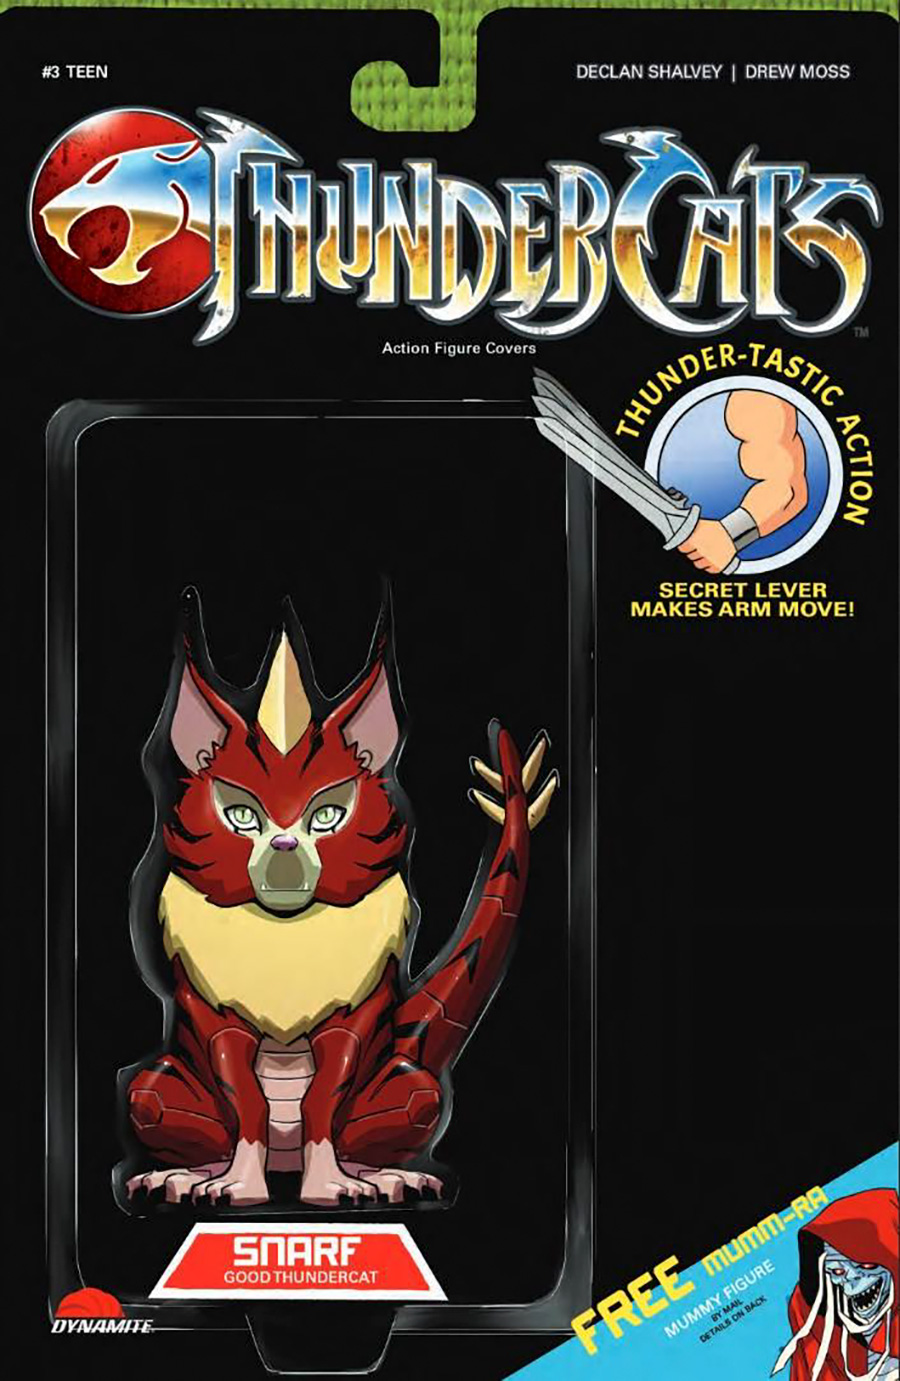 Thundercats Vol 3 #3 Cover F Variant Action Figure Cover